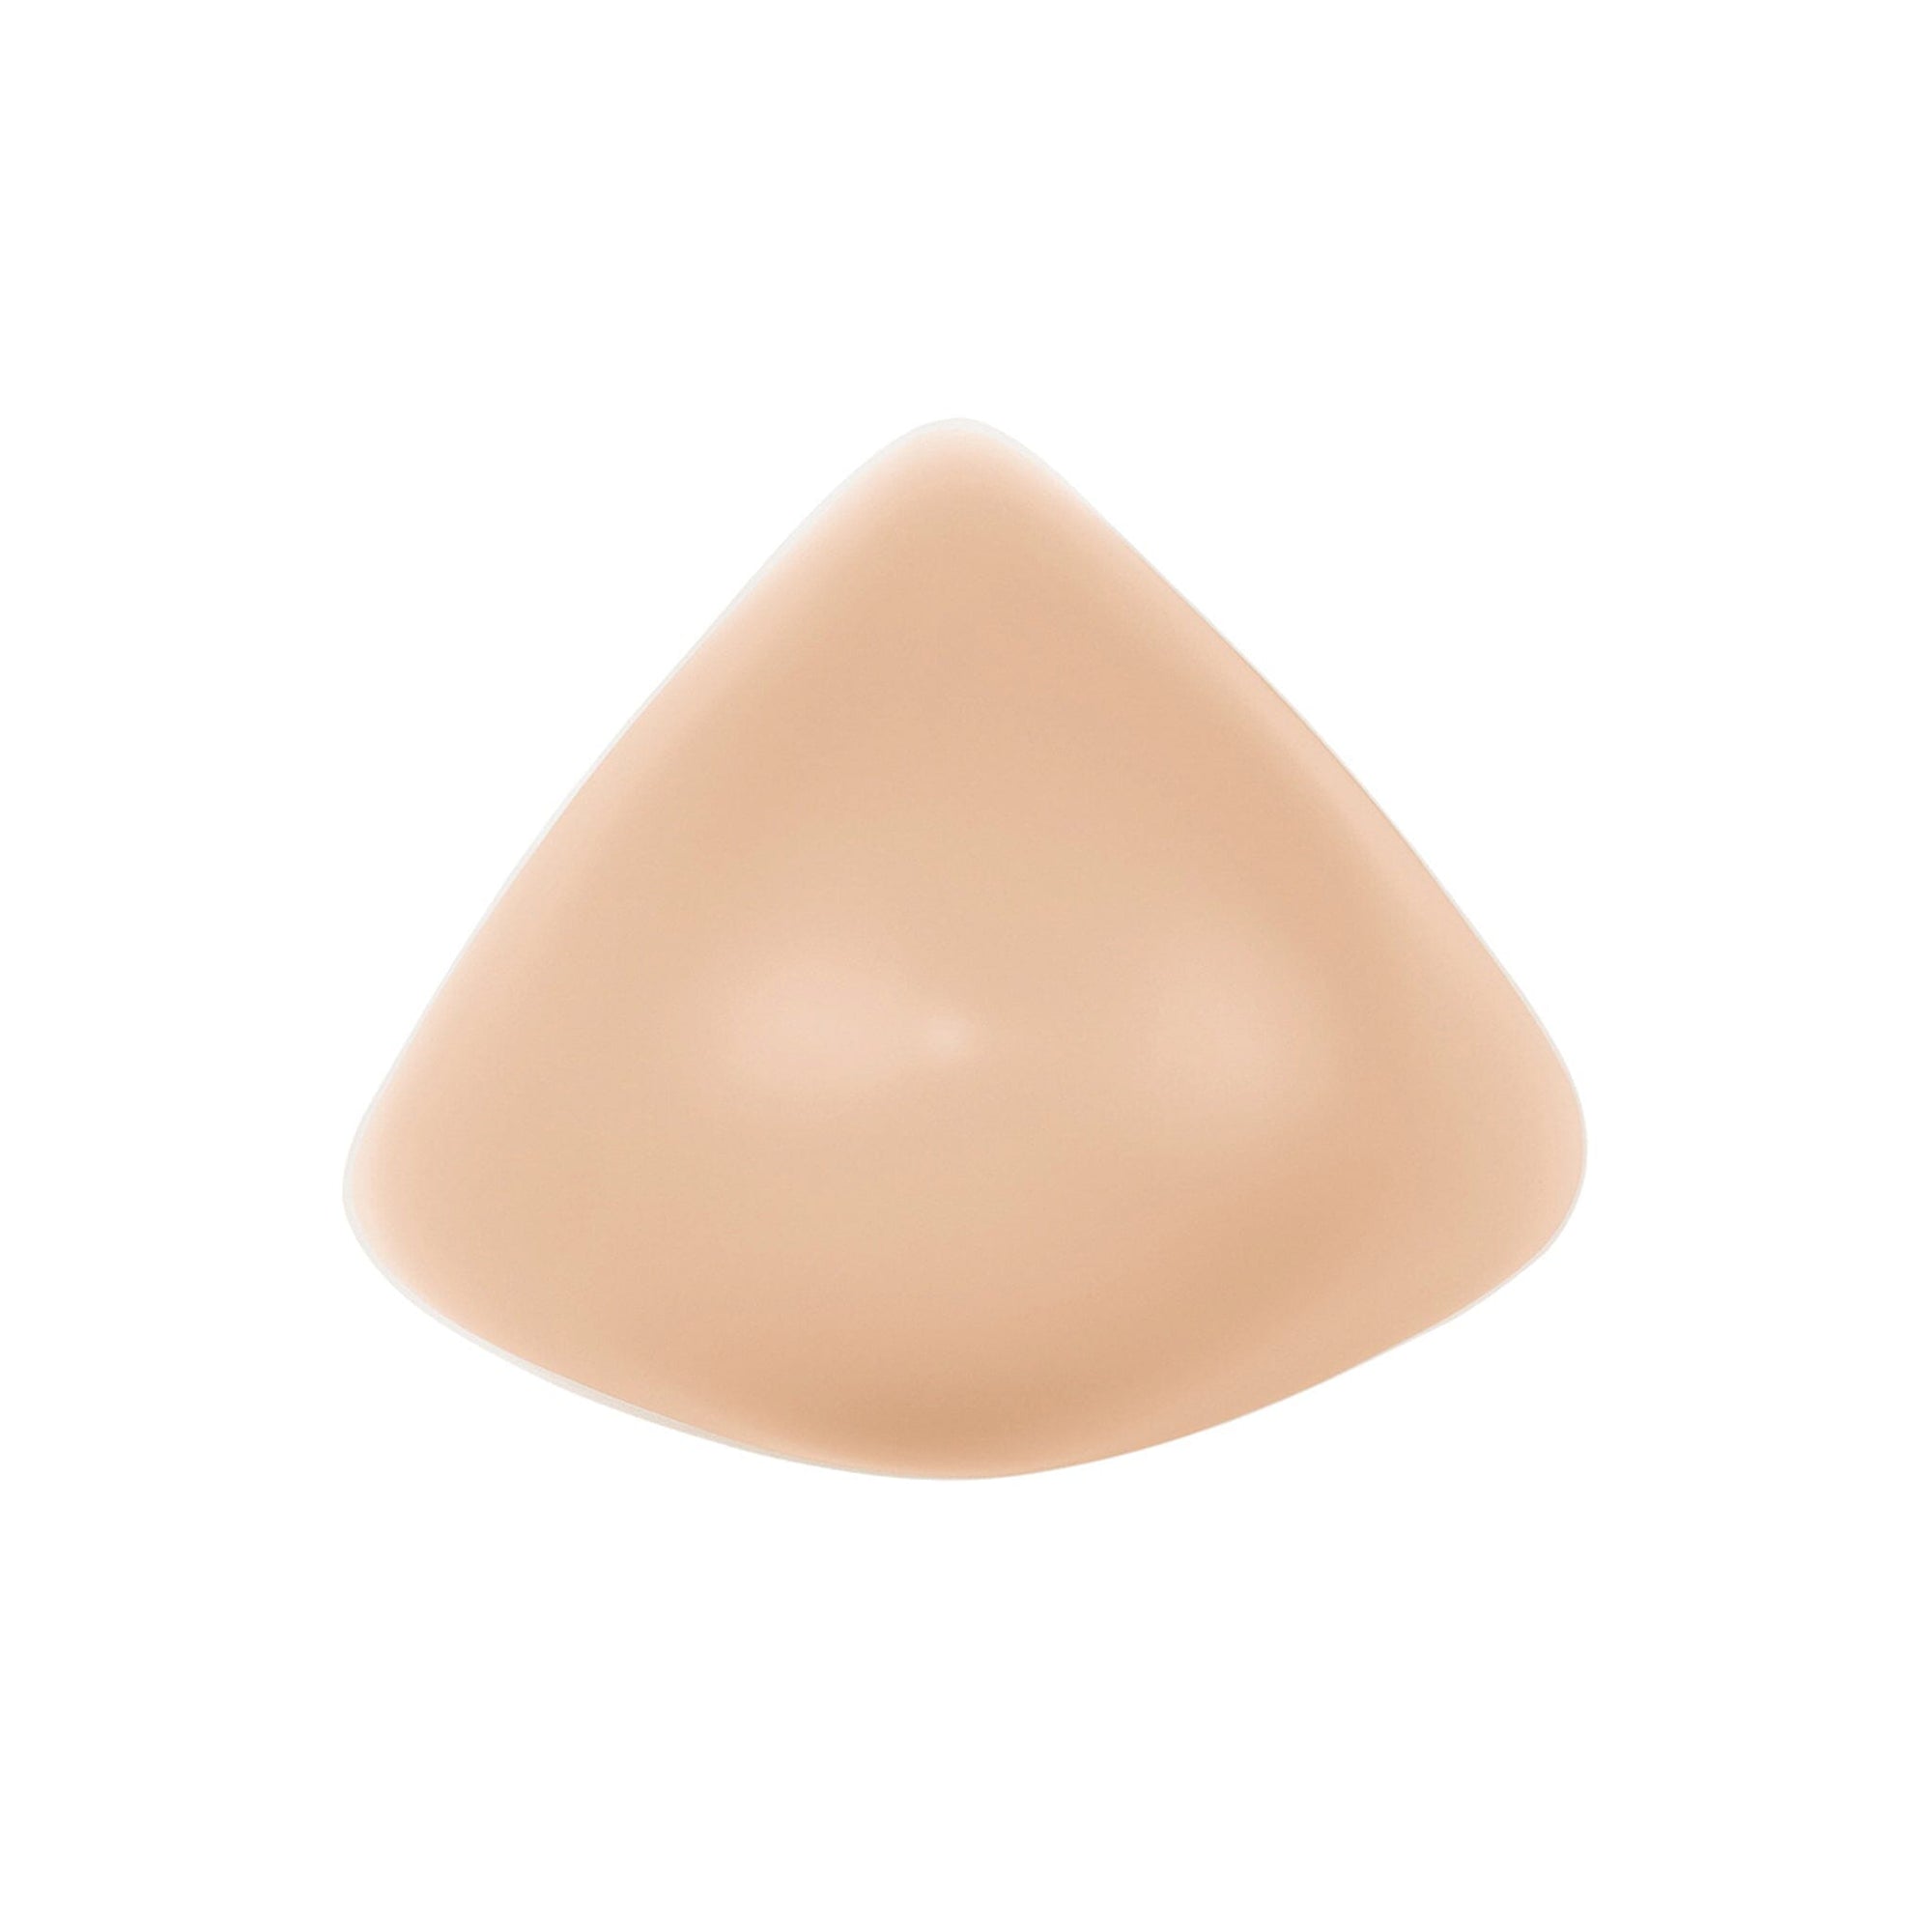 #9934 Amoena® Basic 2S Breast Form Front View